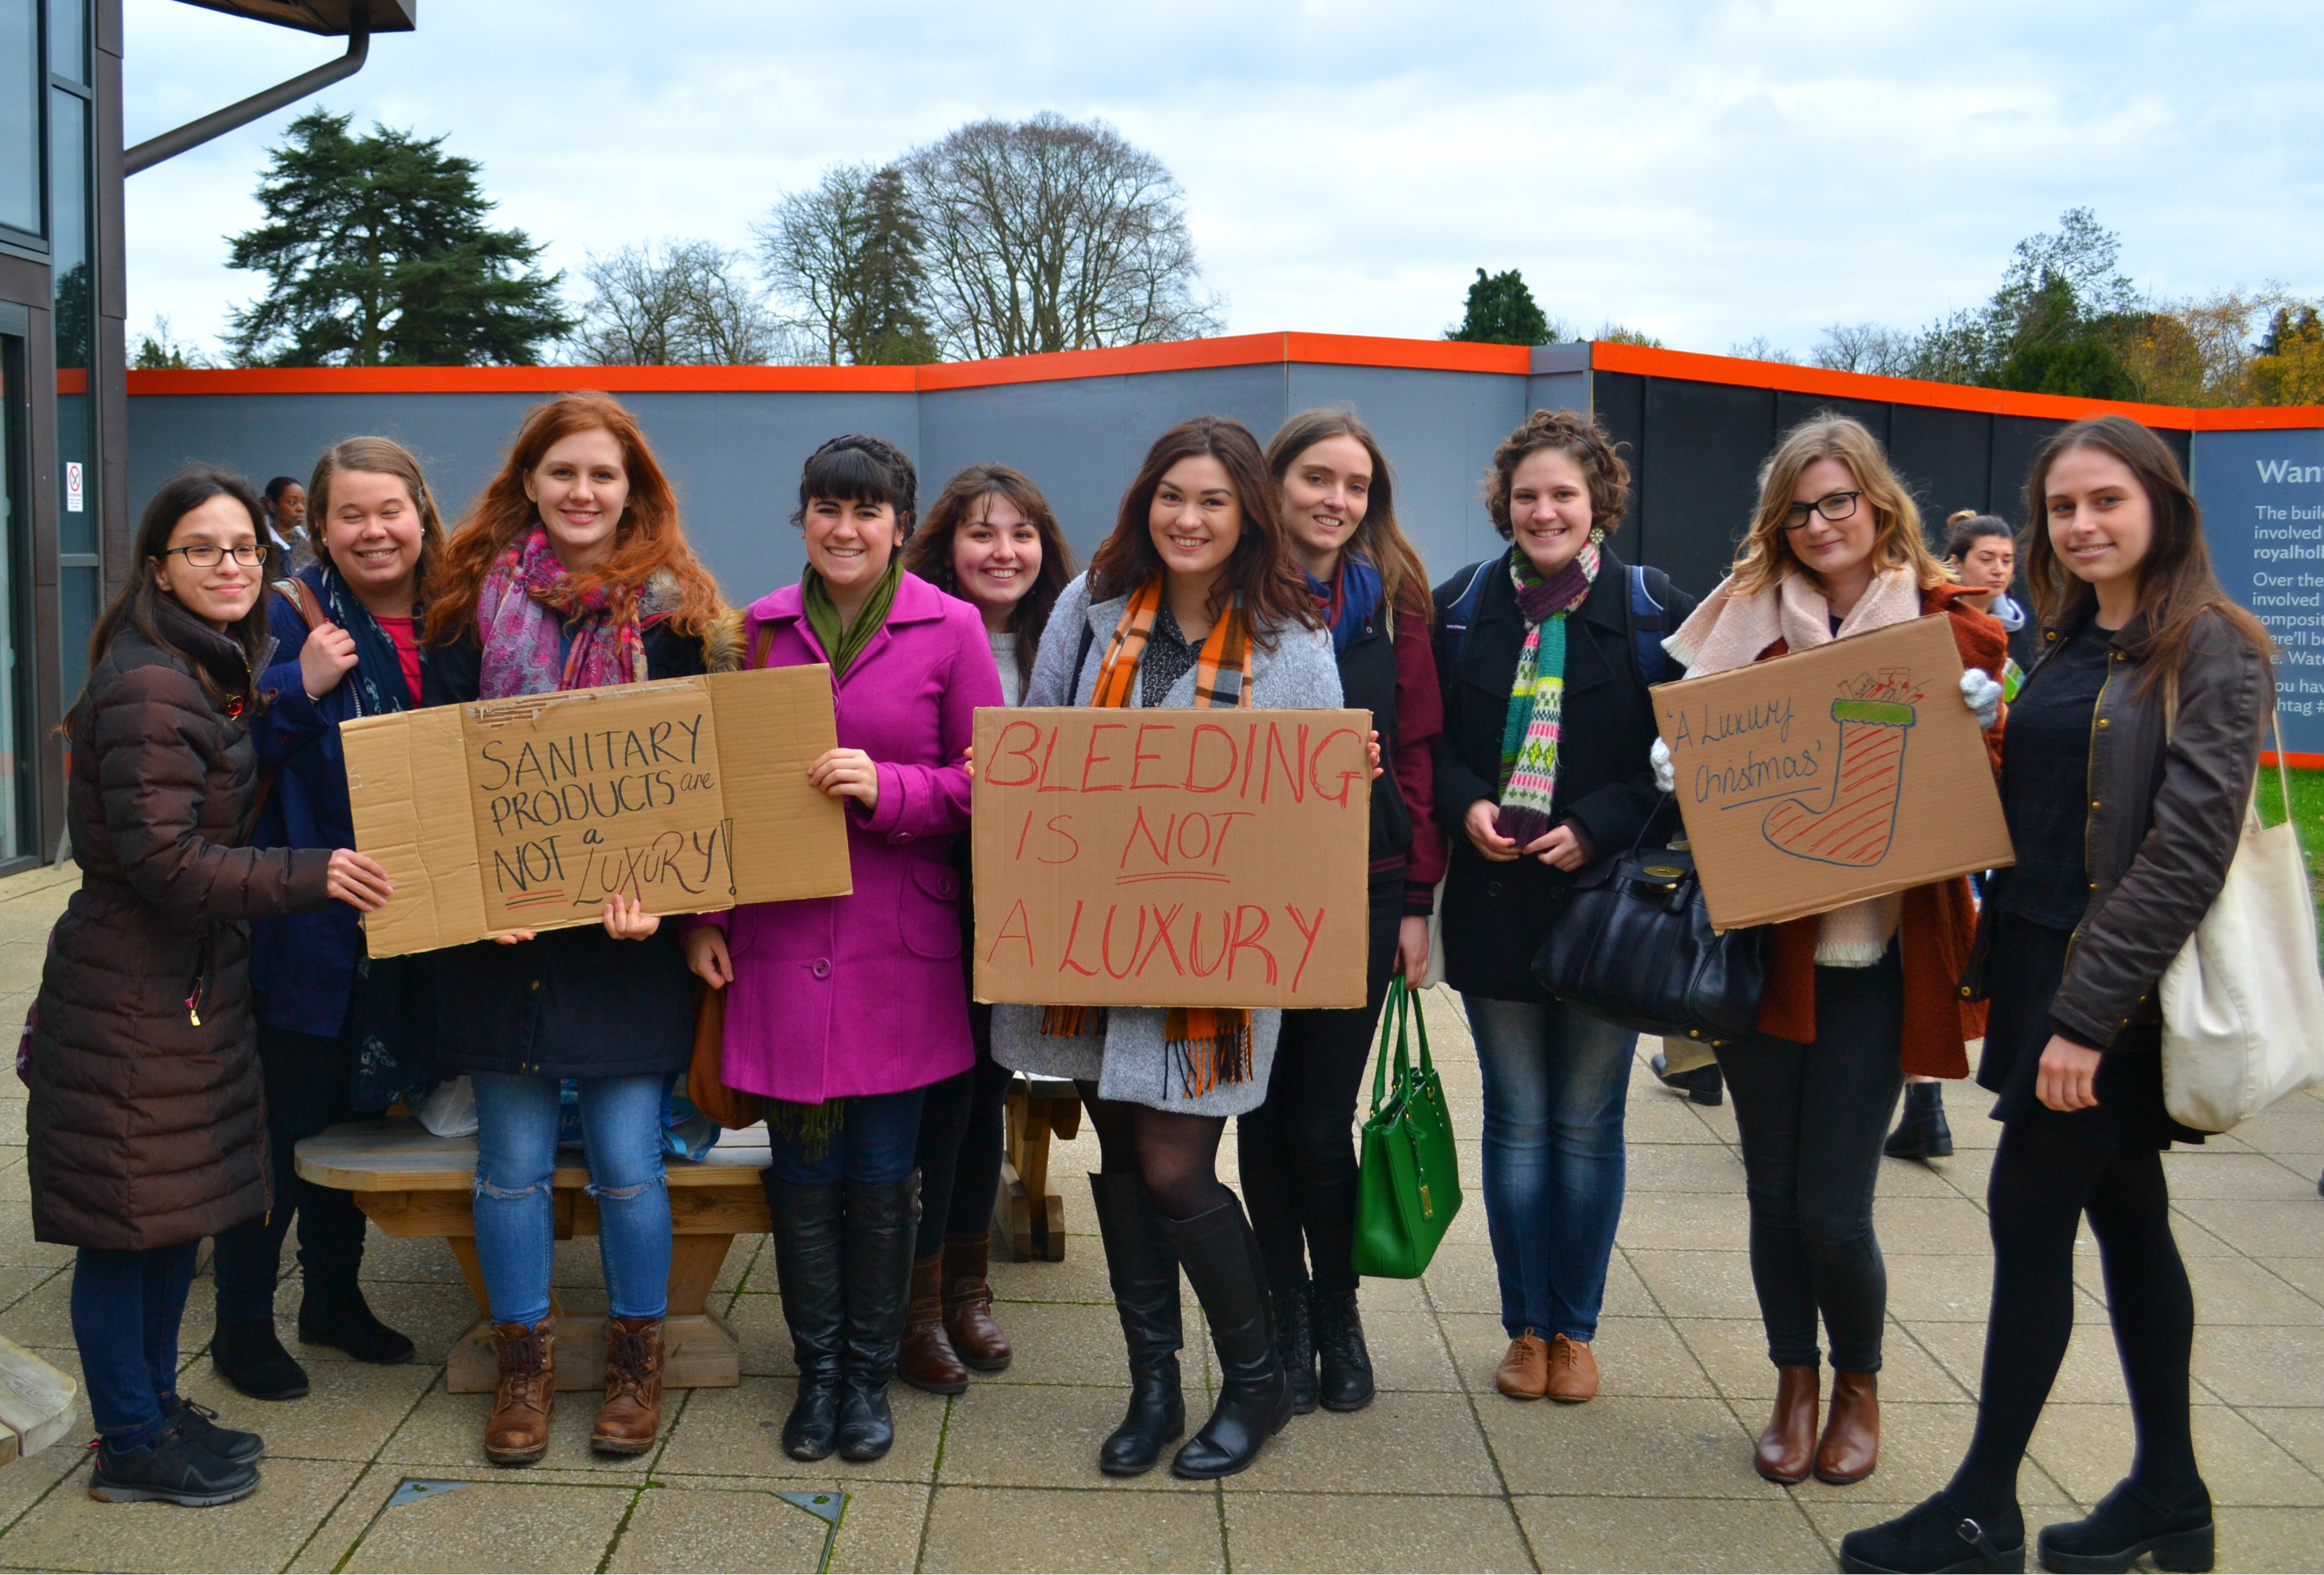 Students at Royal Holloway protesting against the tampon tax.